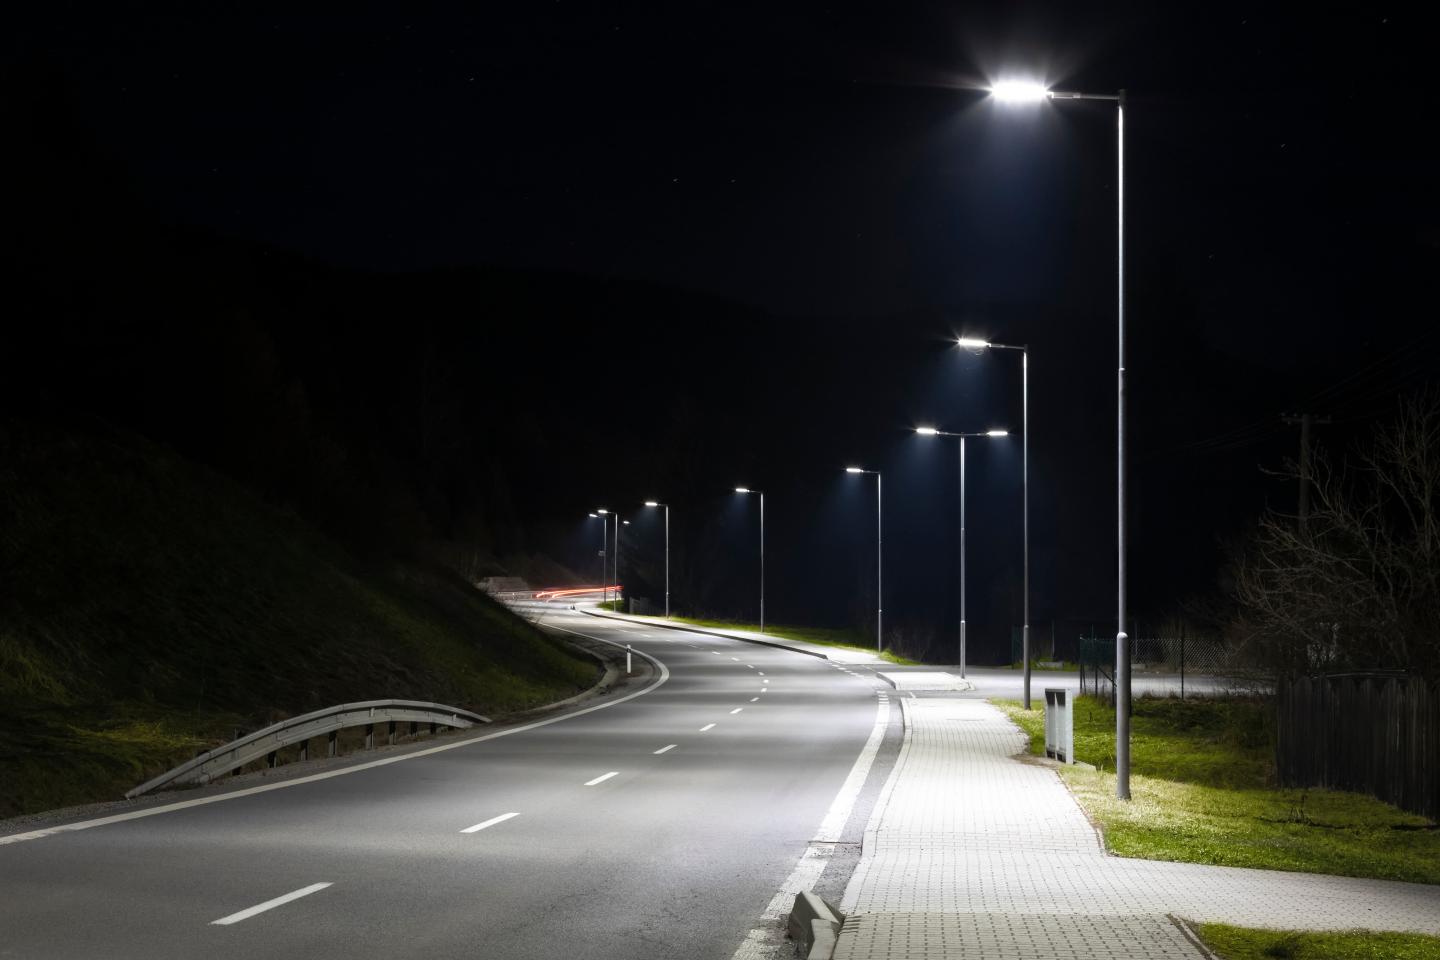 A row of white, LED street rights on an empty road at night